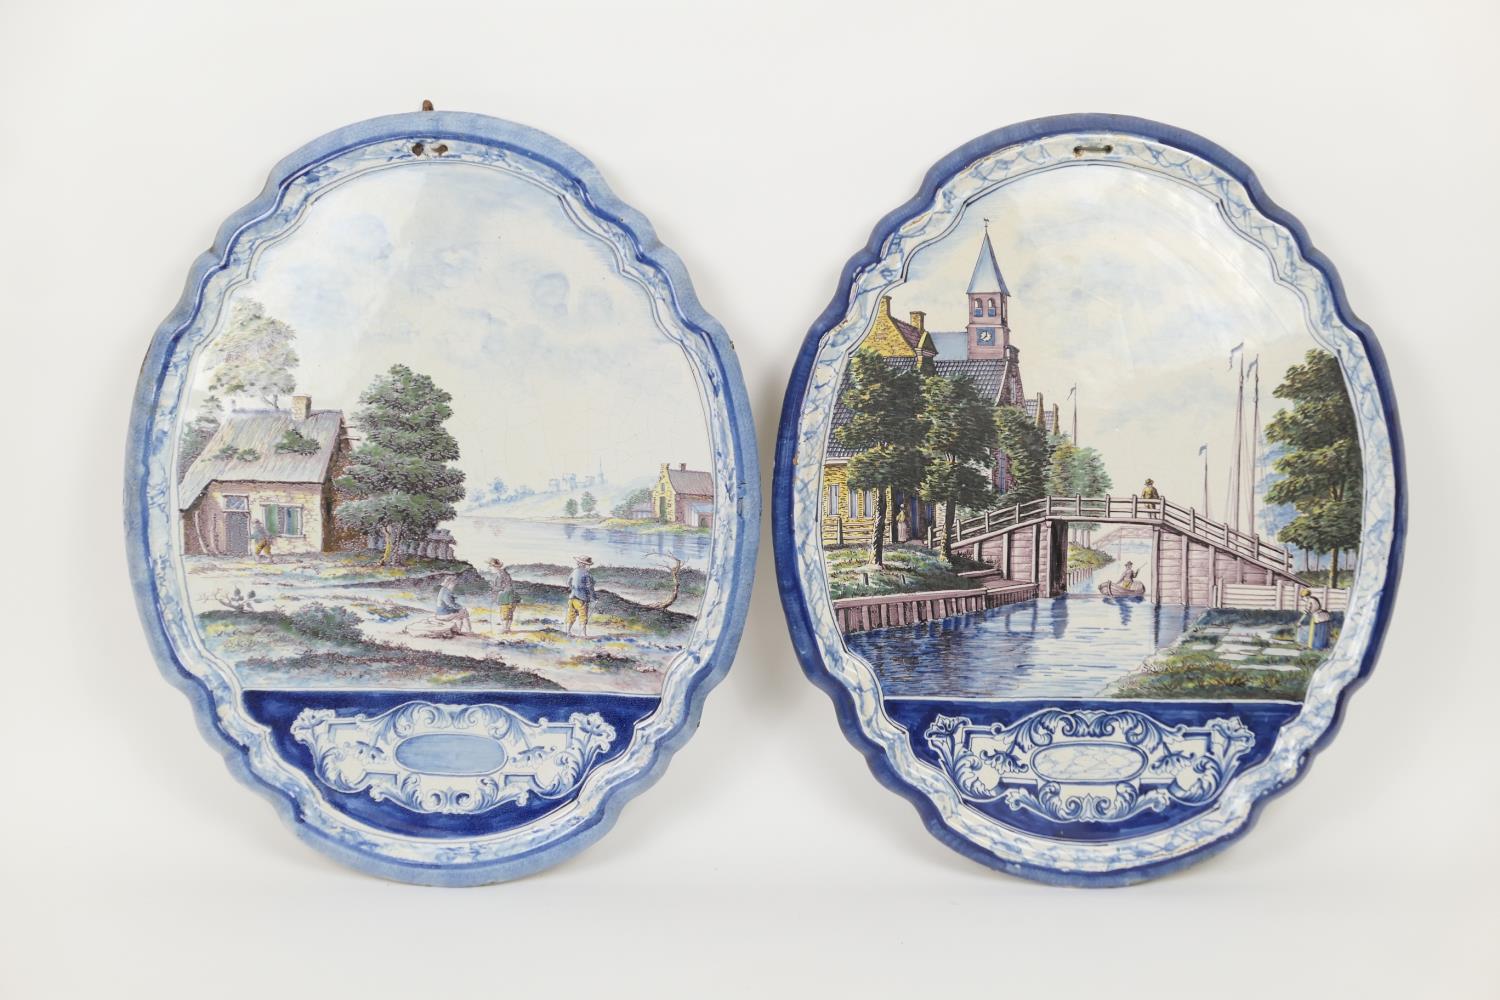 Two Makkum faience wall plaques, one featuring a canal scene, the other figures beside a river, both